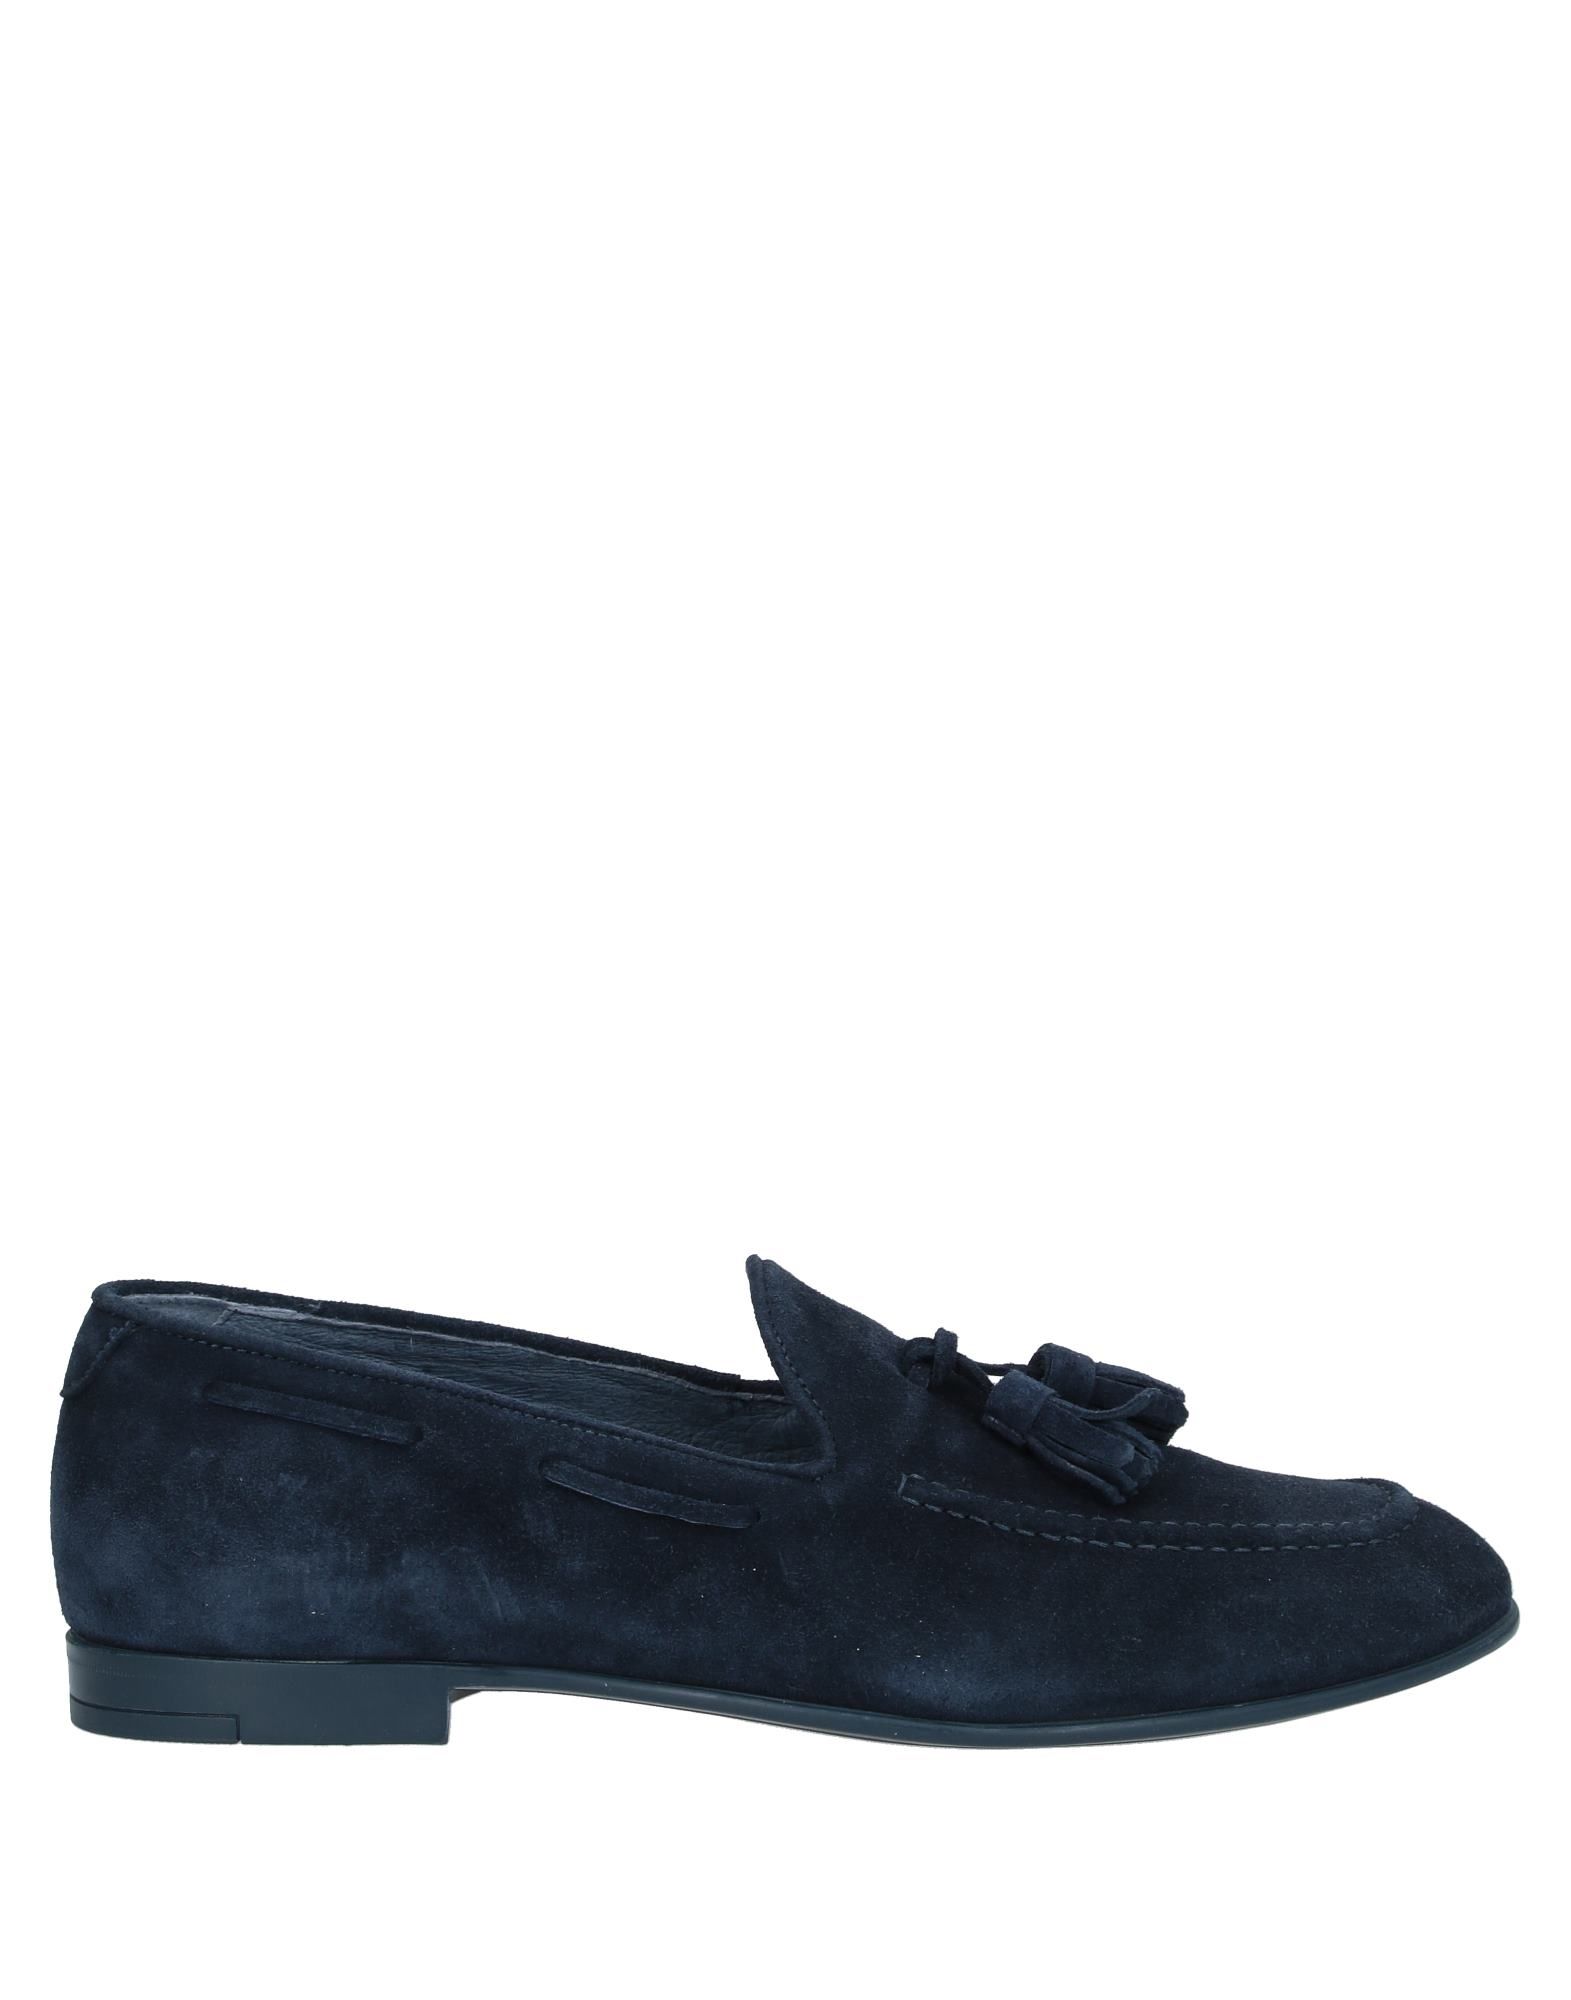 FLORSHEIM IMPERIAL Loafers